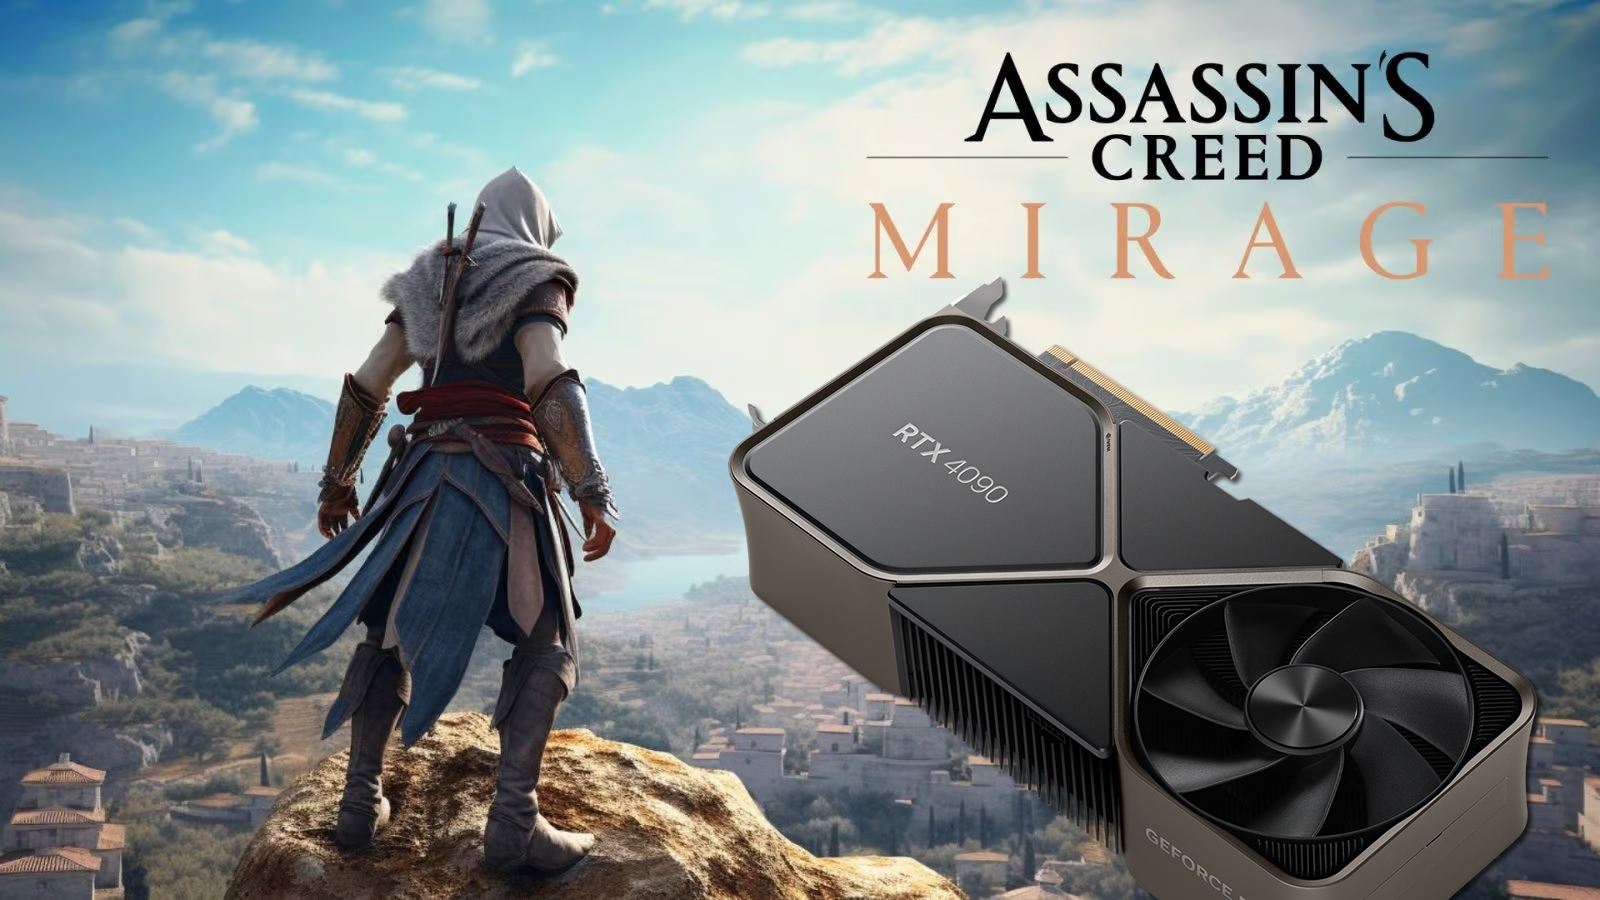 Nvidia boosts Assassin’s Creed Mirage performance with Resizable Bar update